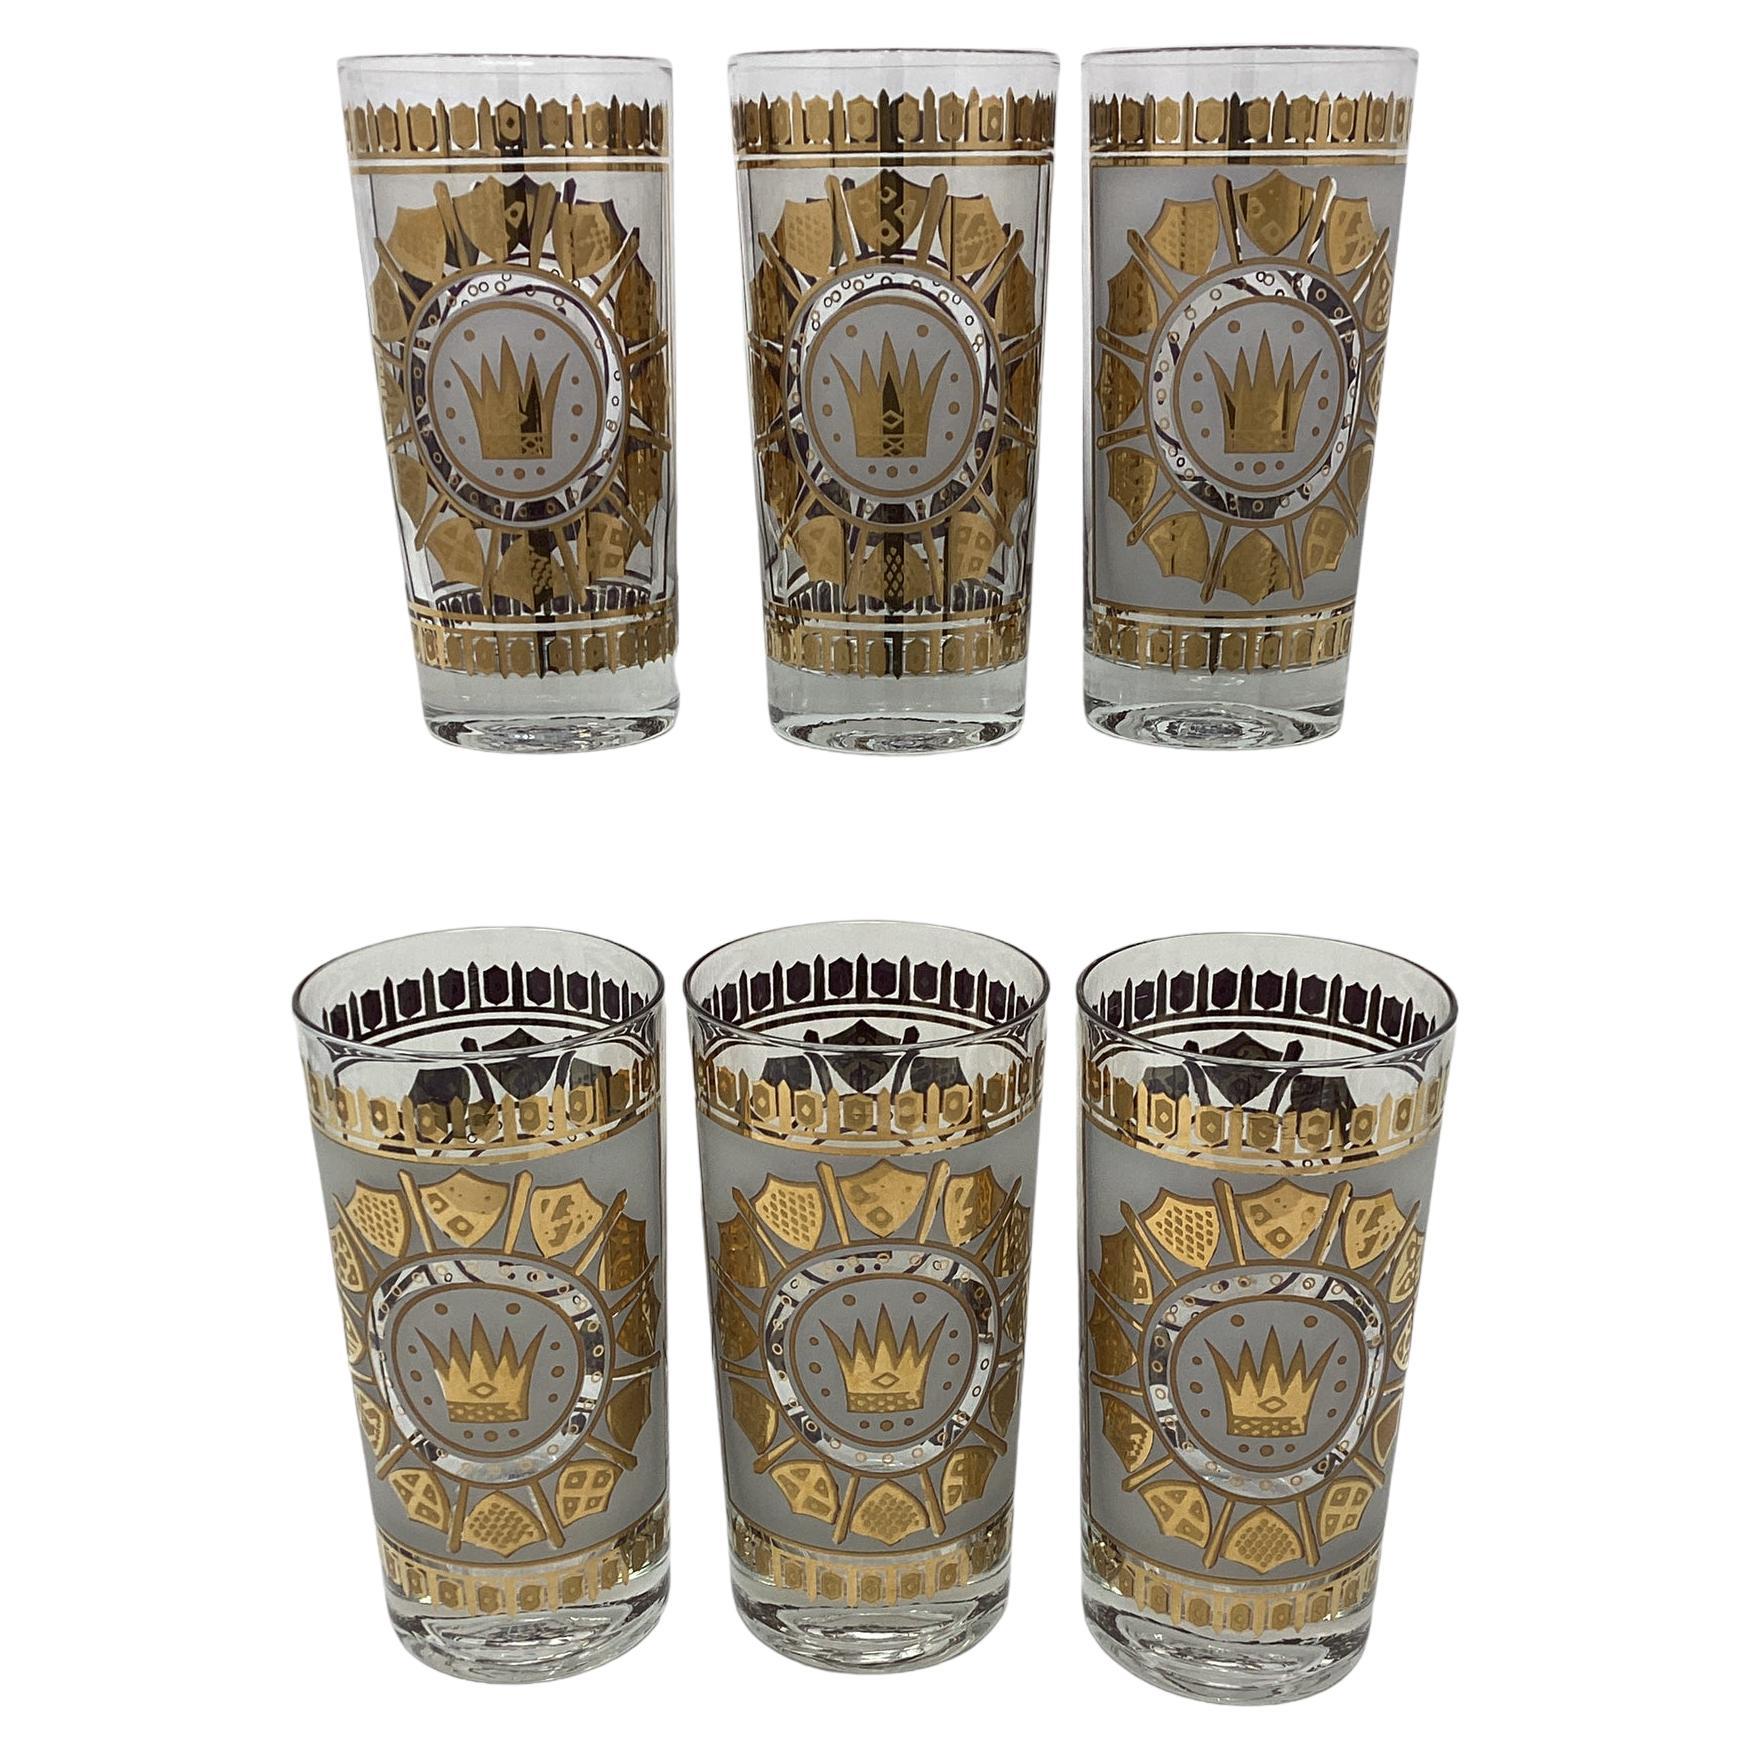 Set of 6 Highball Glasses with Crowns and Shields Decoration. For Sale